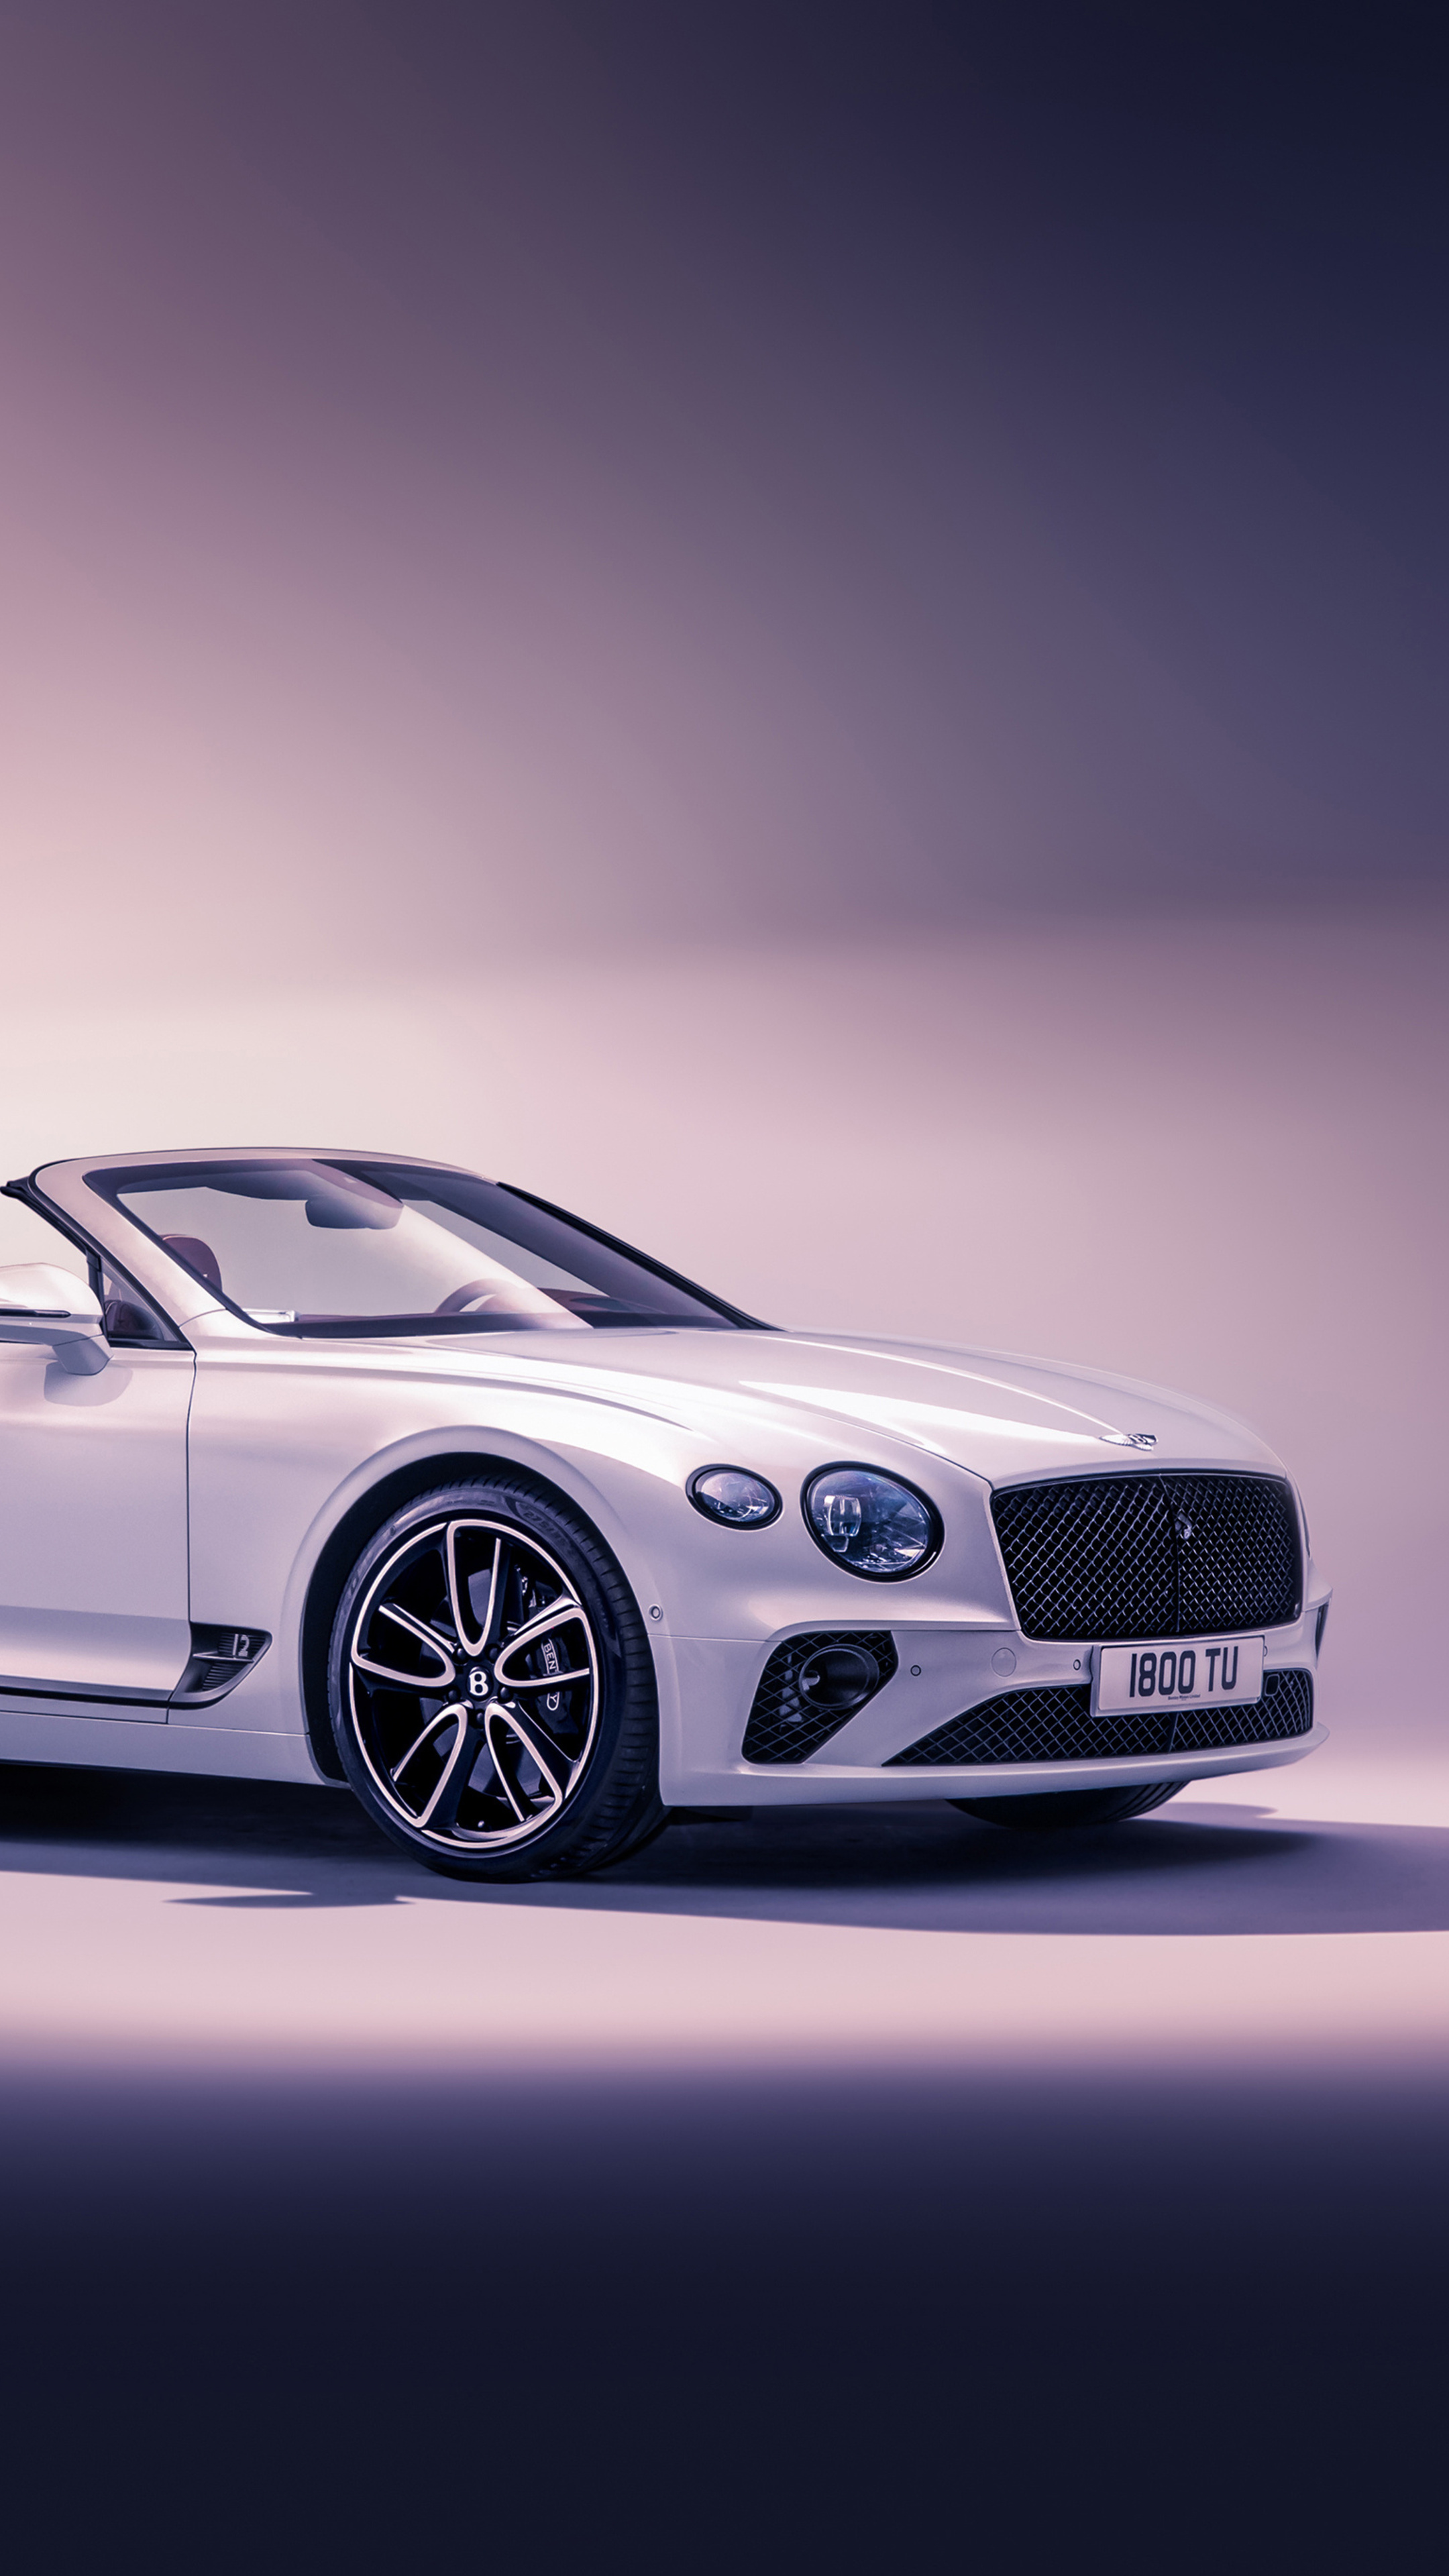 Bentley Continental GTC, Xperia 4K wallpapers, Luxury elegance, High-resolution images, 2160x3840 4K Phone